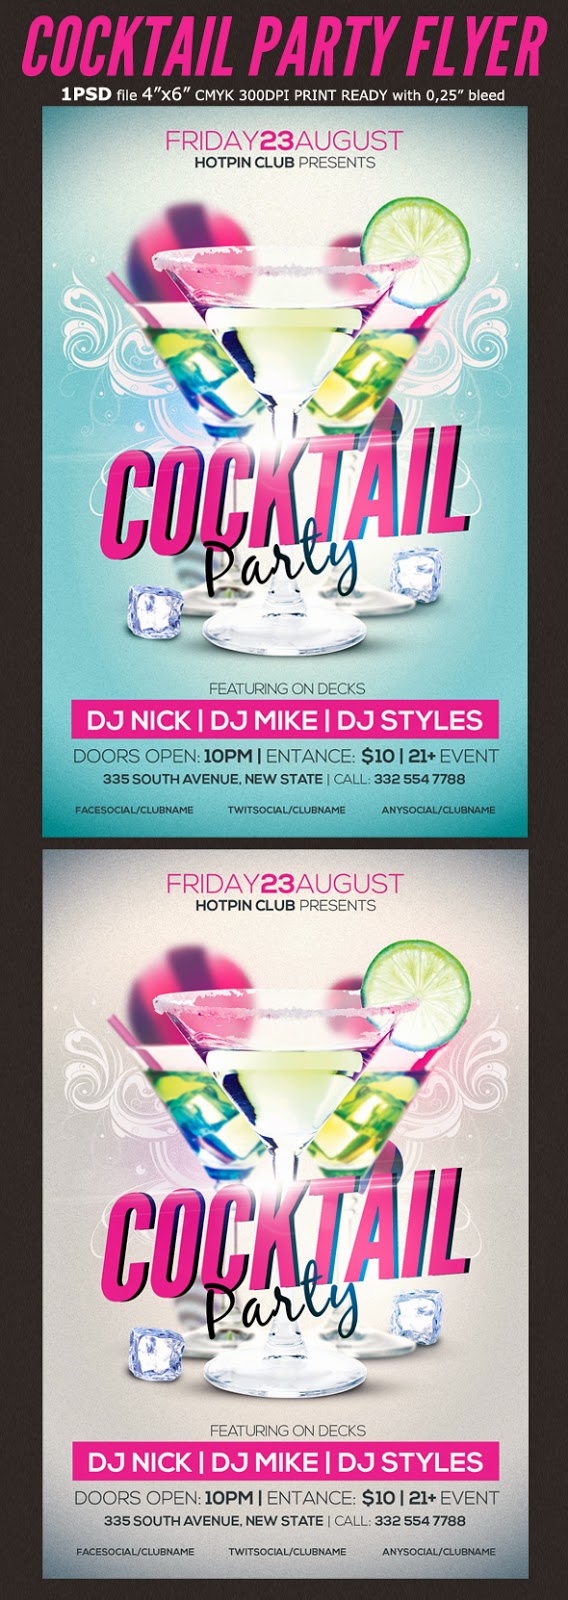  Cocktail Party Flyer Template 2